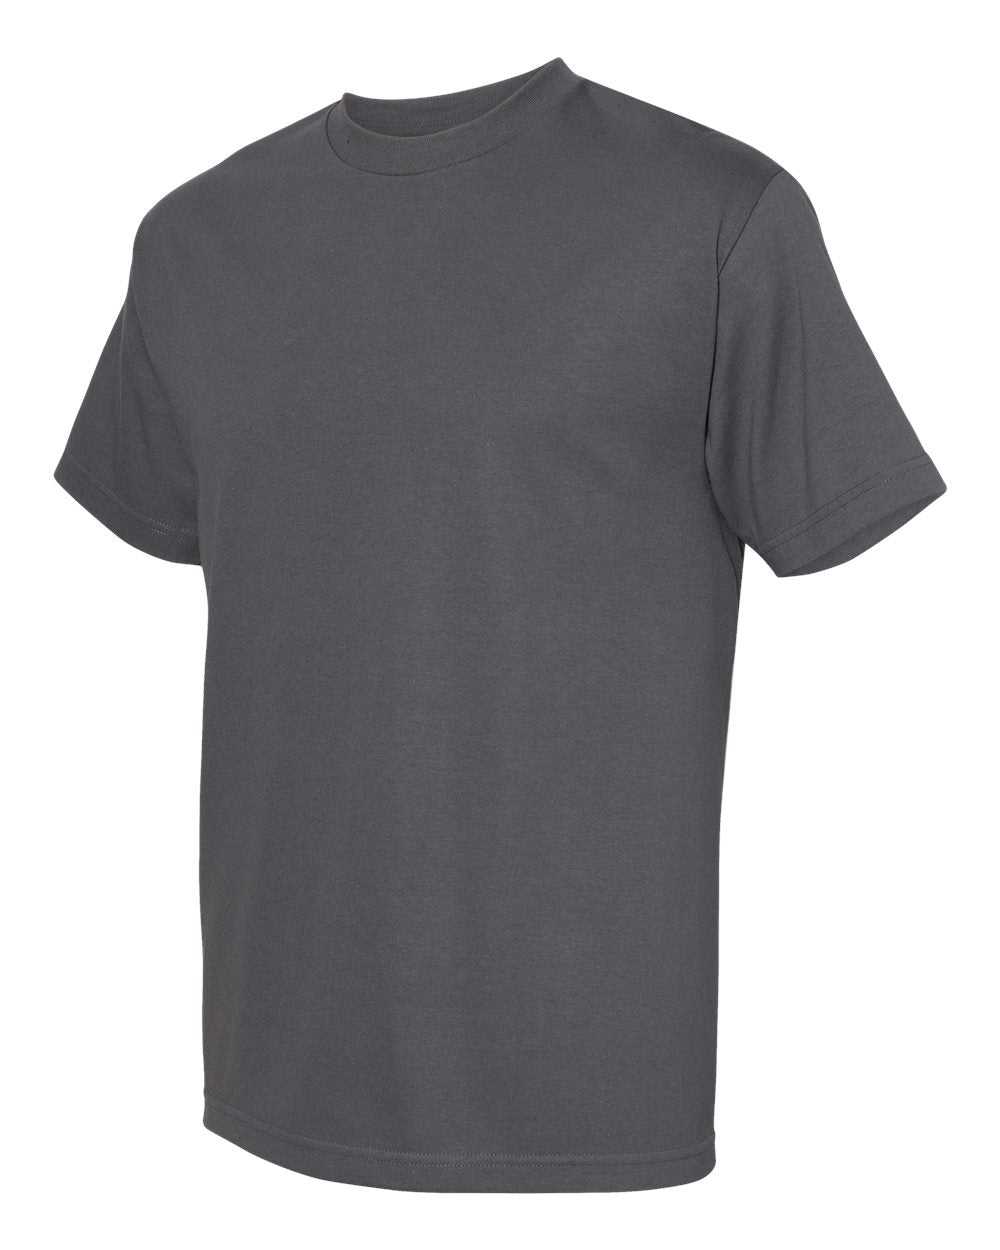 American Apparel 1301 Unisex Heavyweight Cotton T-Shirt - Charcoal - HIT a Double